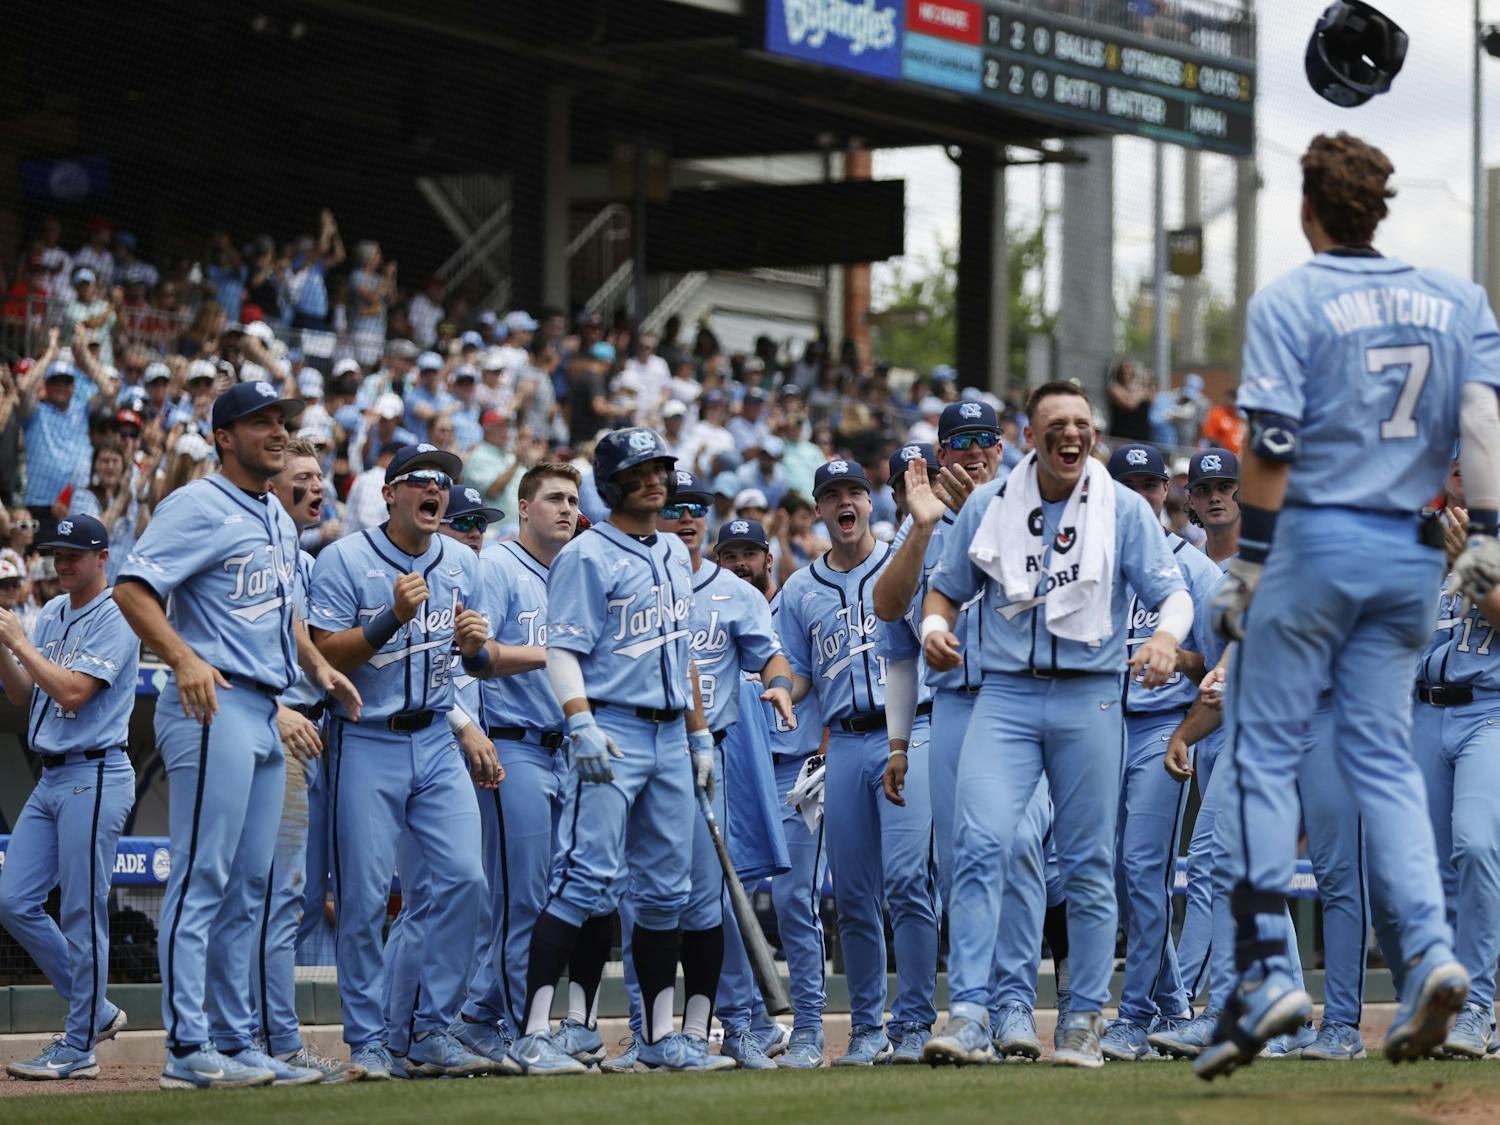 in the 2022 ACC Baseball Championship in Charlotte, N.C., Sunday, May 29, 2022. Photo courtesy of Nell Redmond/ACC.